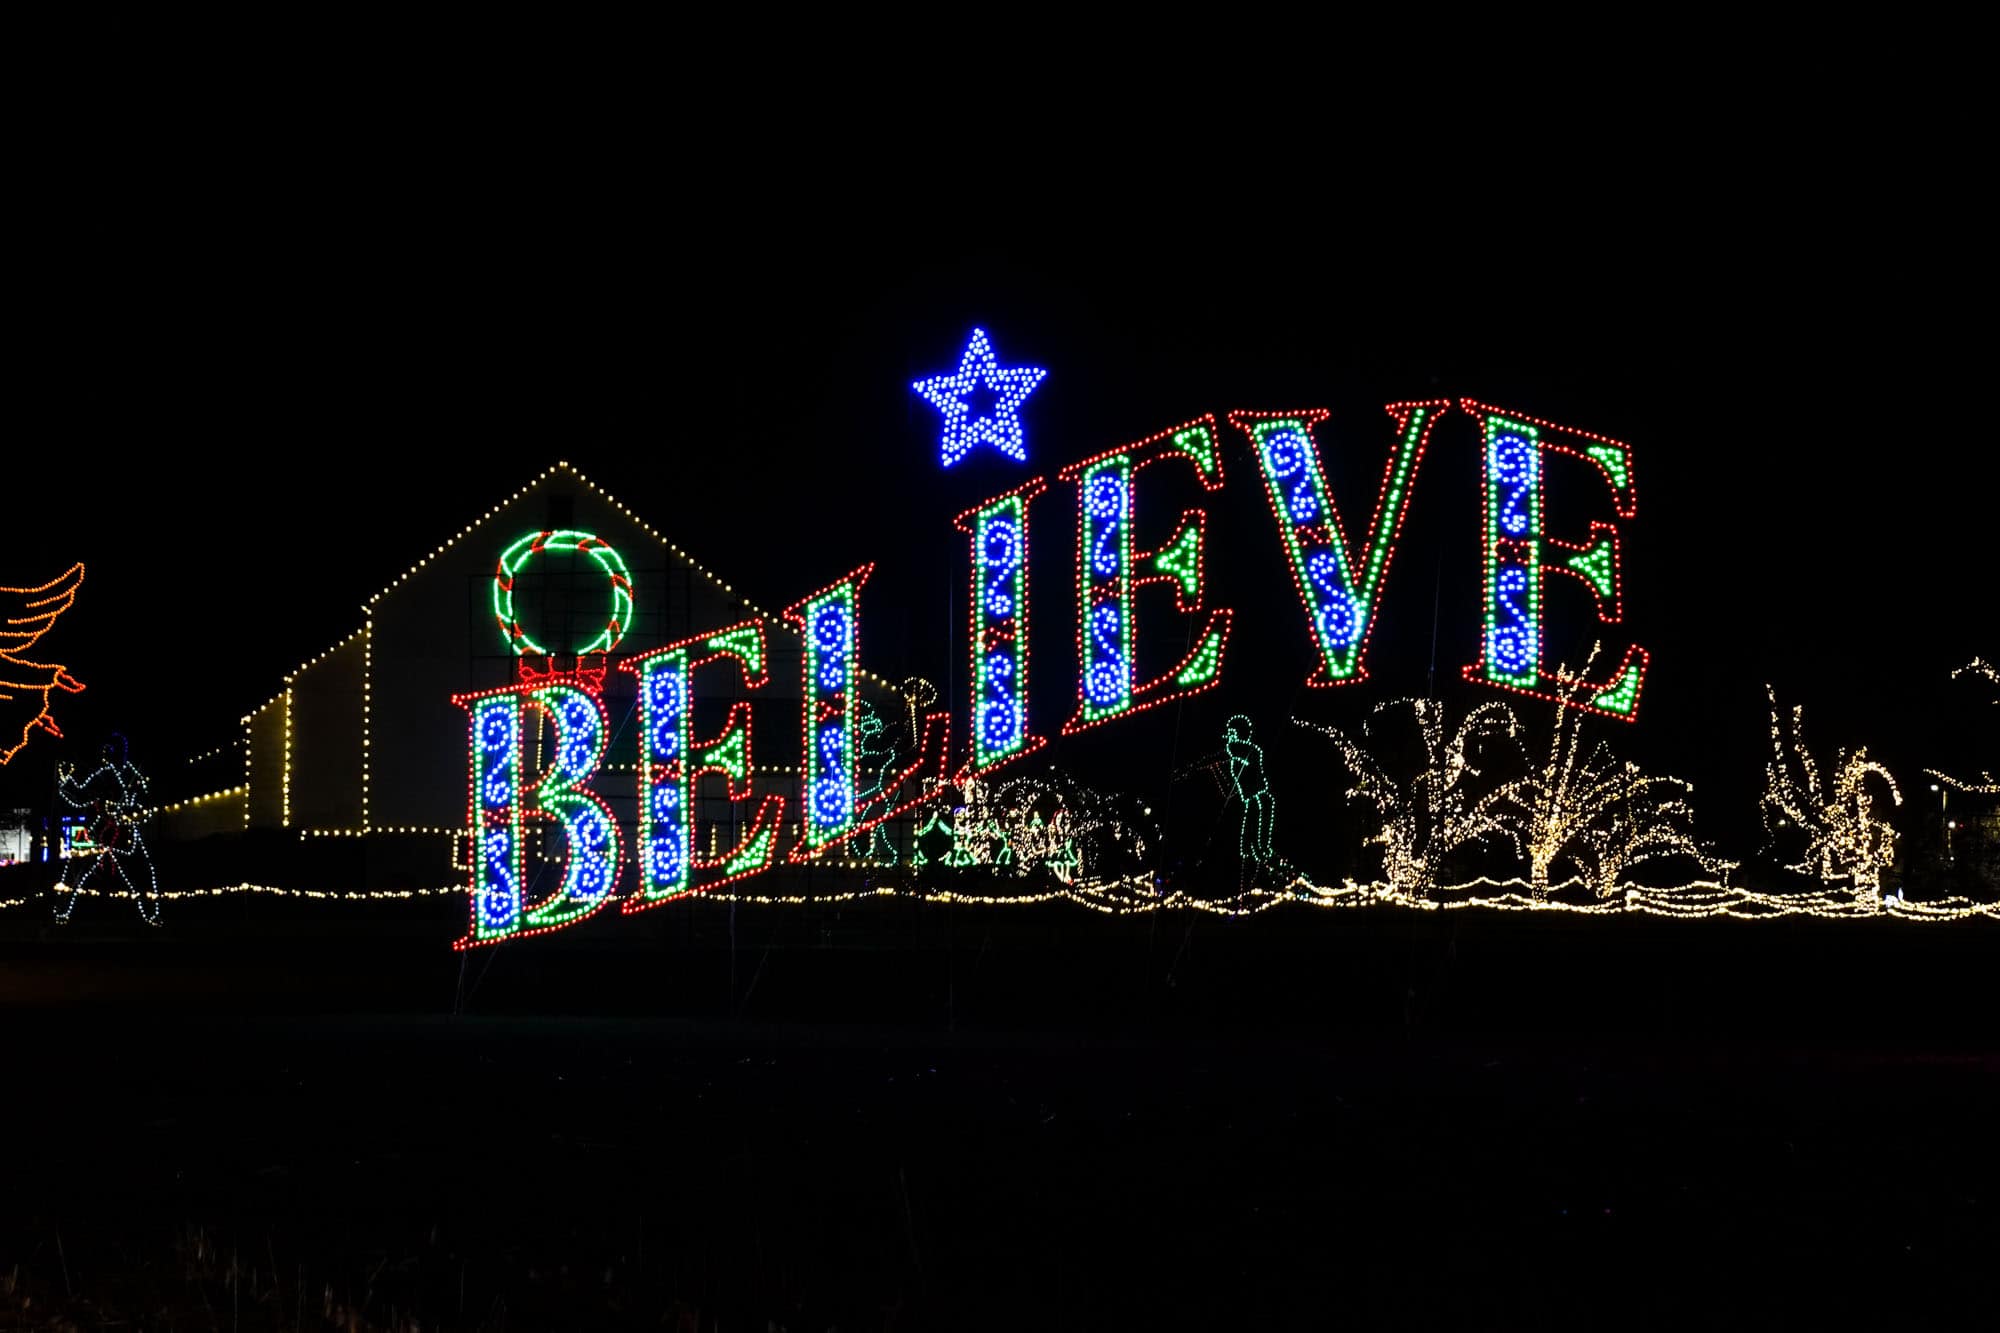 Blue and red holiday lights spelling out "Believe"